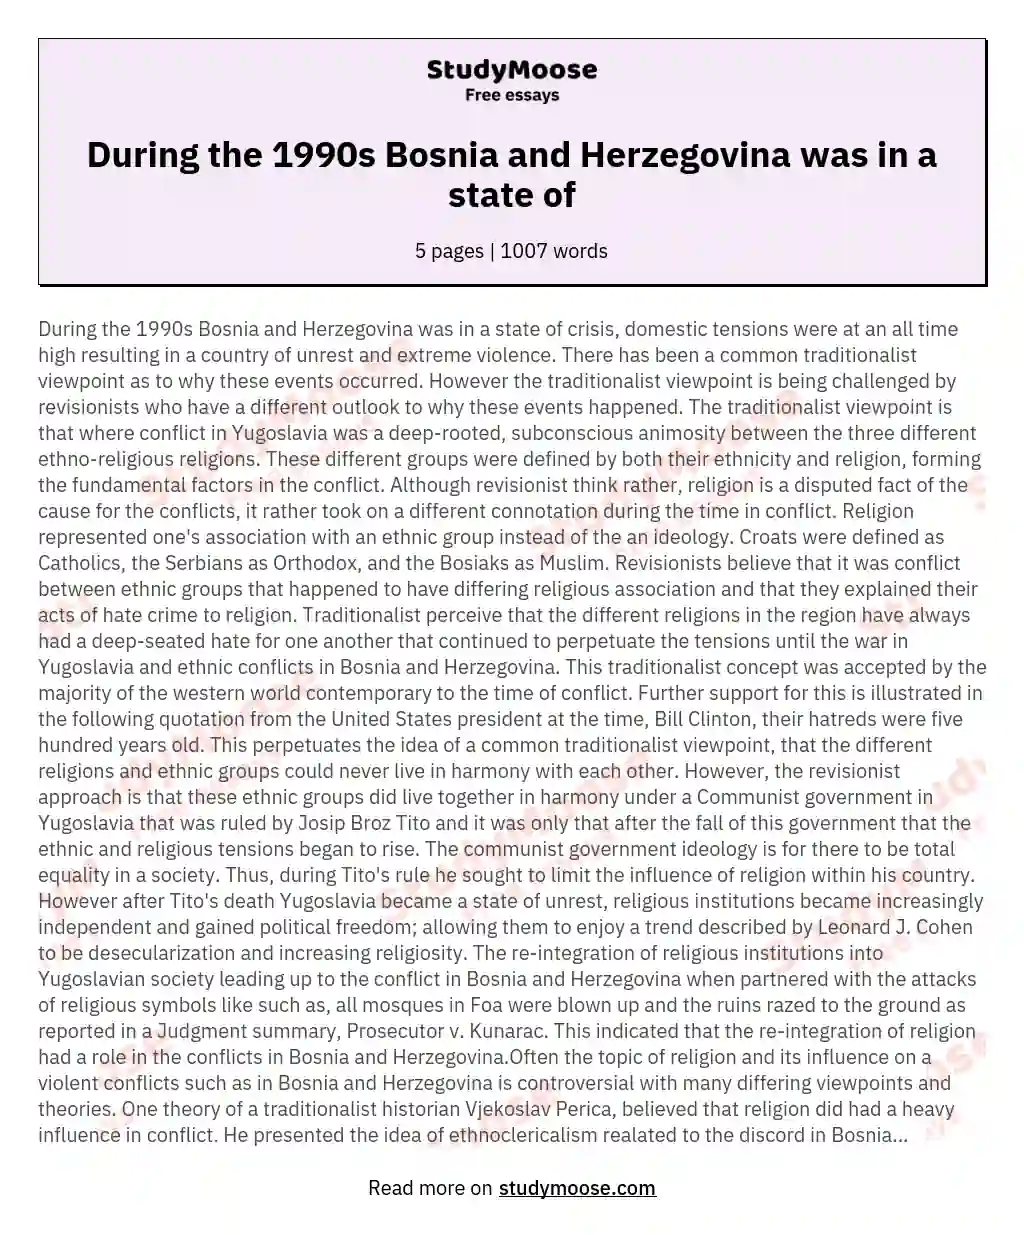 During the 1990s Bosnia and Herzegovina was in a state of essay